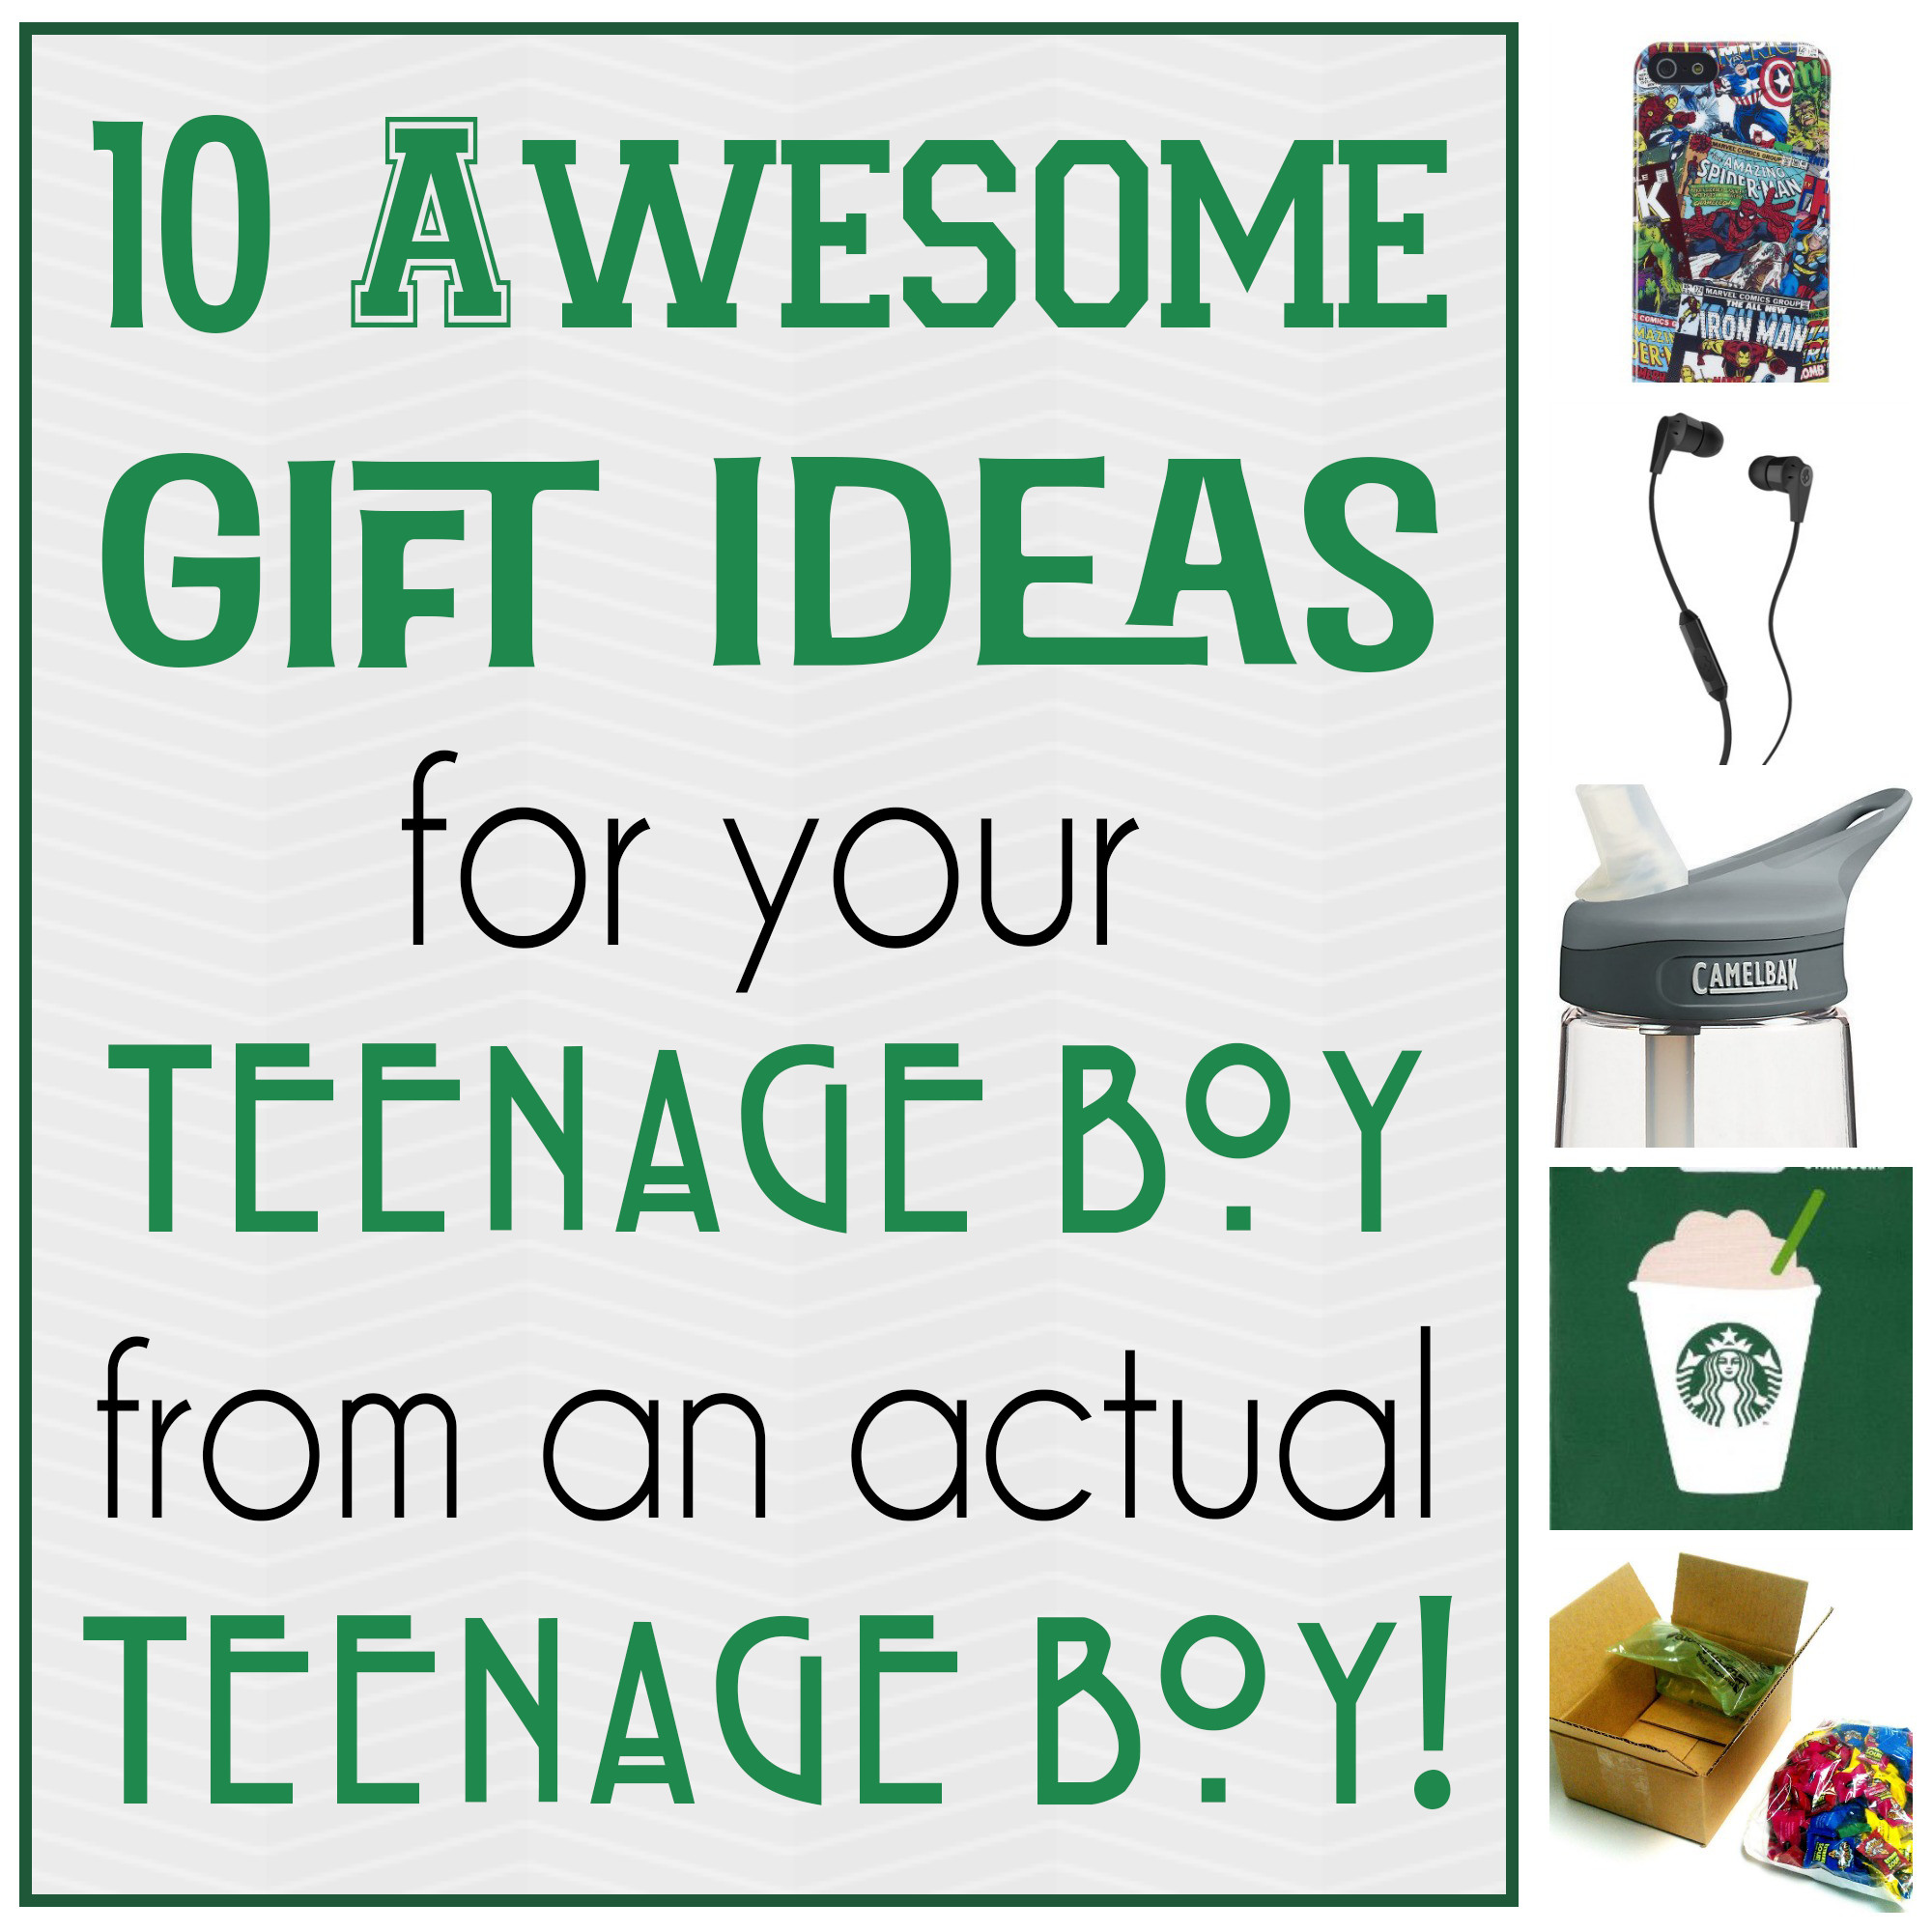 Gift Ideas For Teenager Boys
 10 Awesome Gift Ideas for Teenage Boys